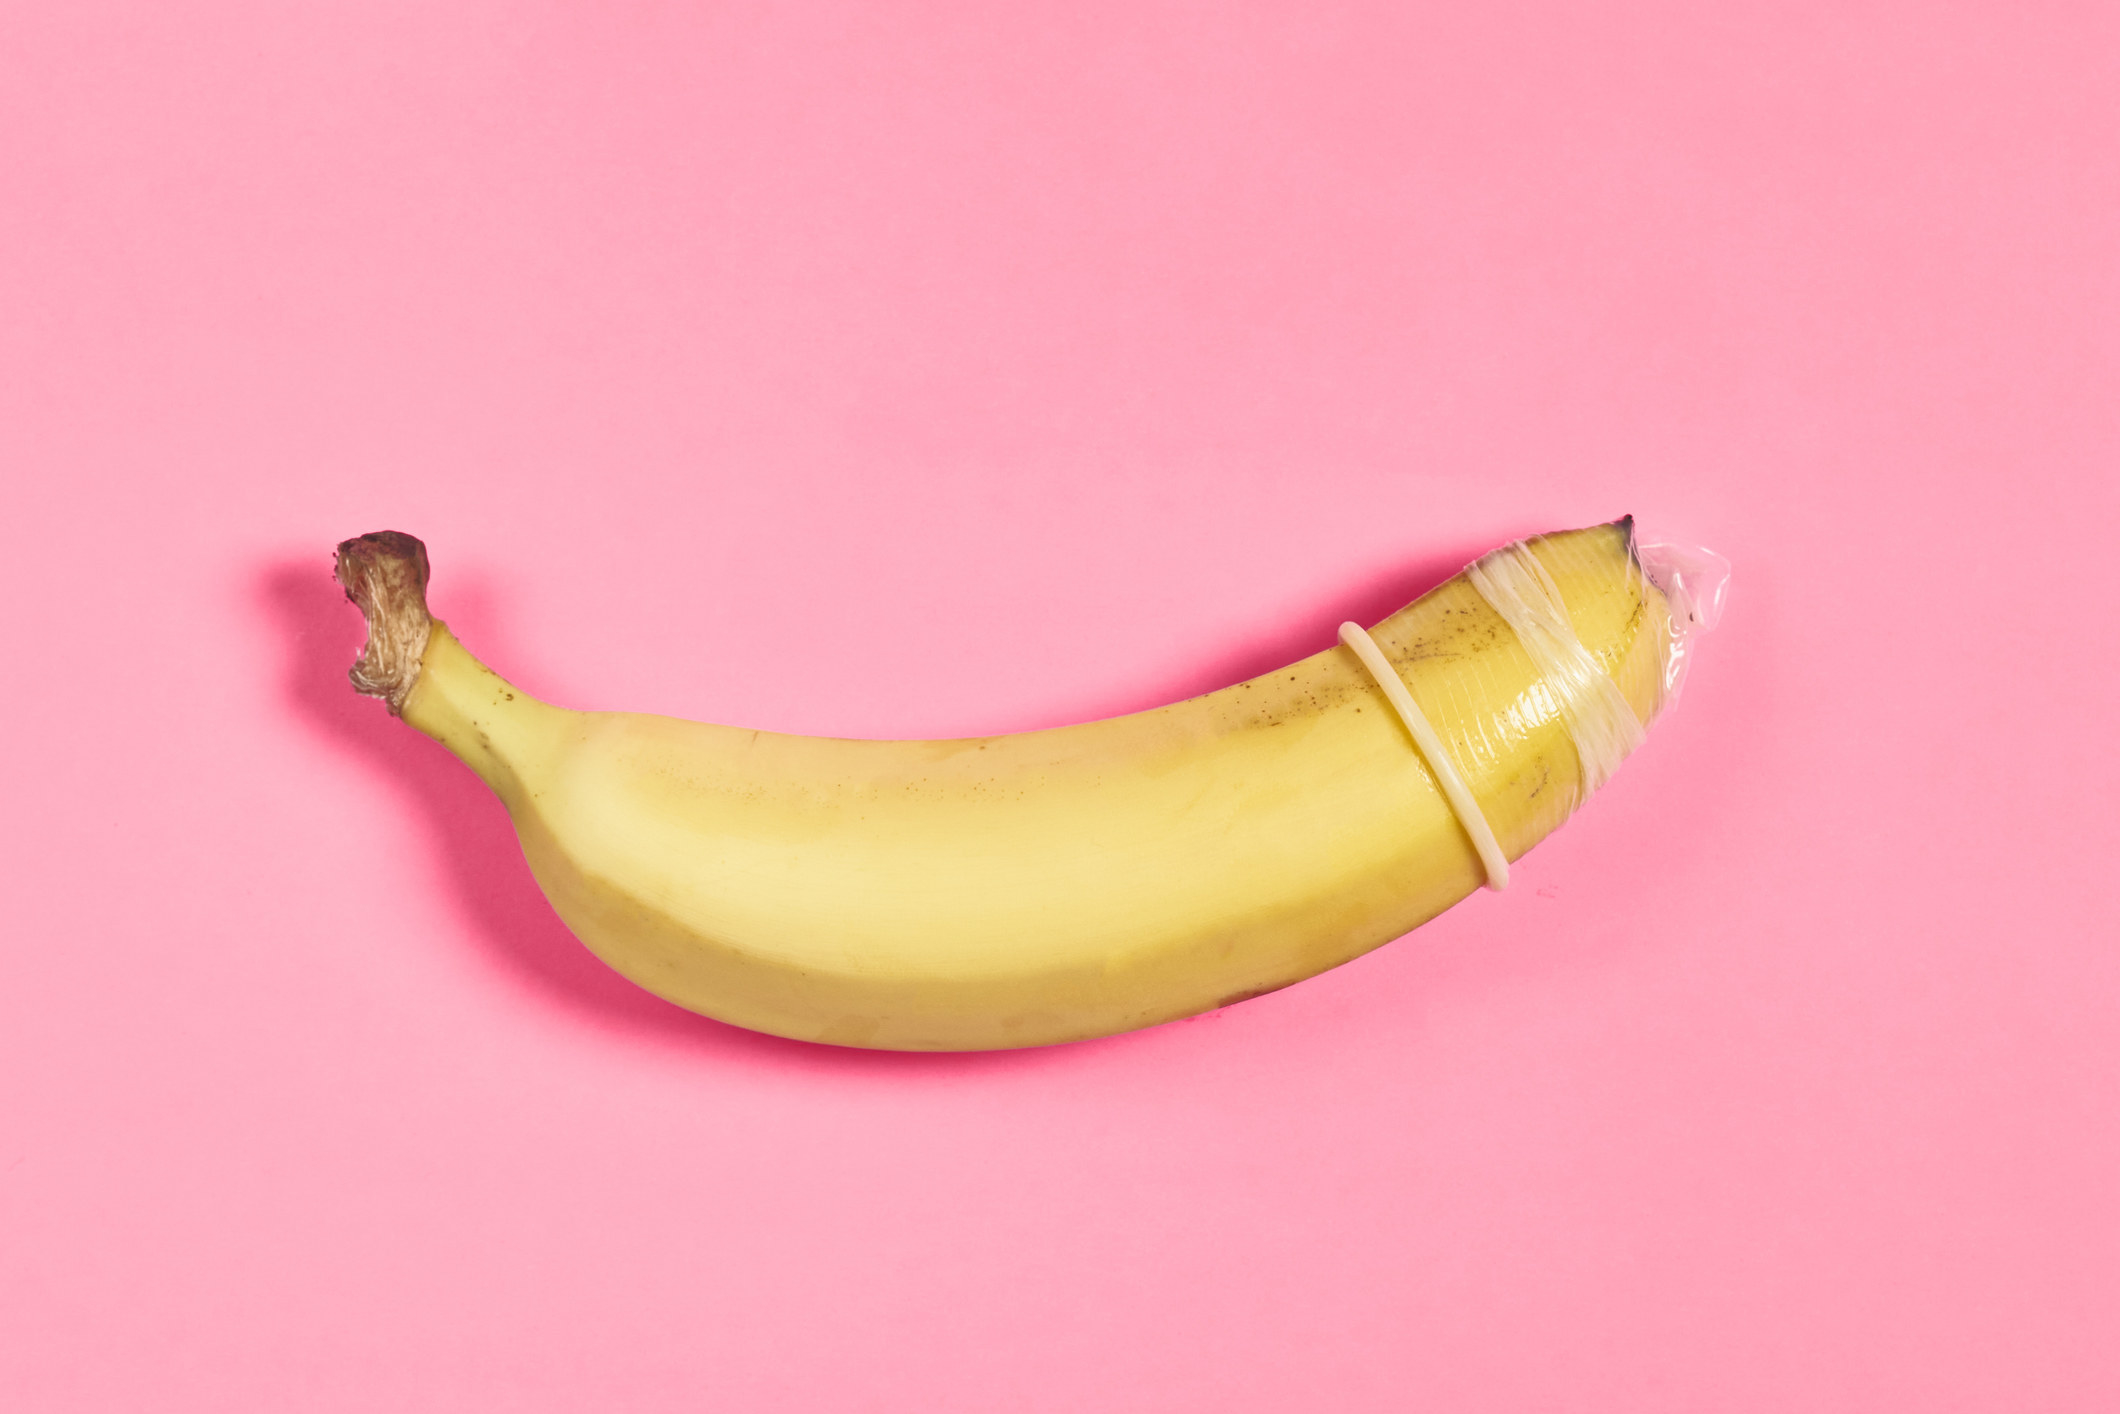 Stock image of a banana with a condom on it